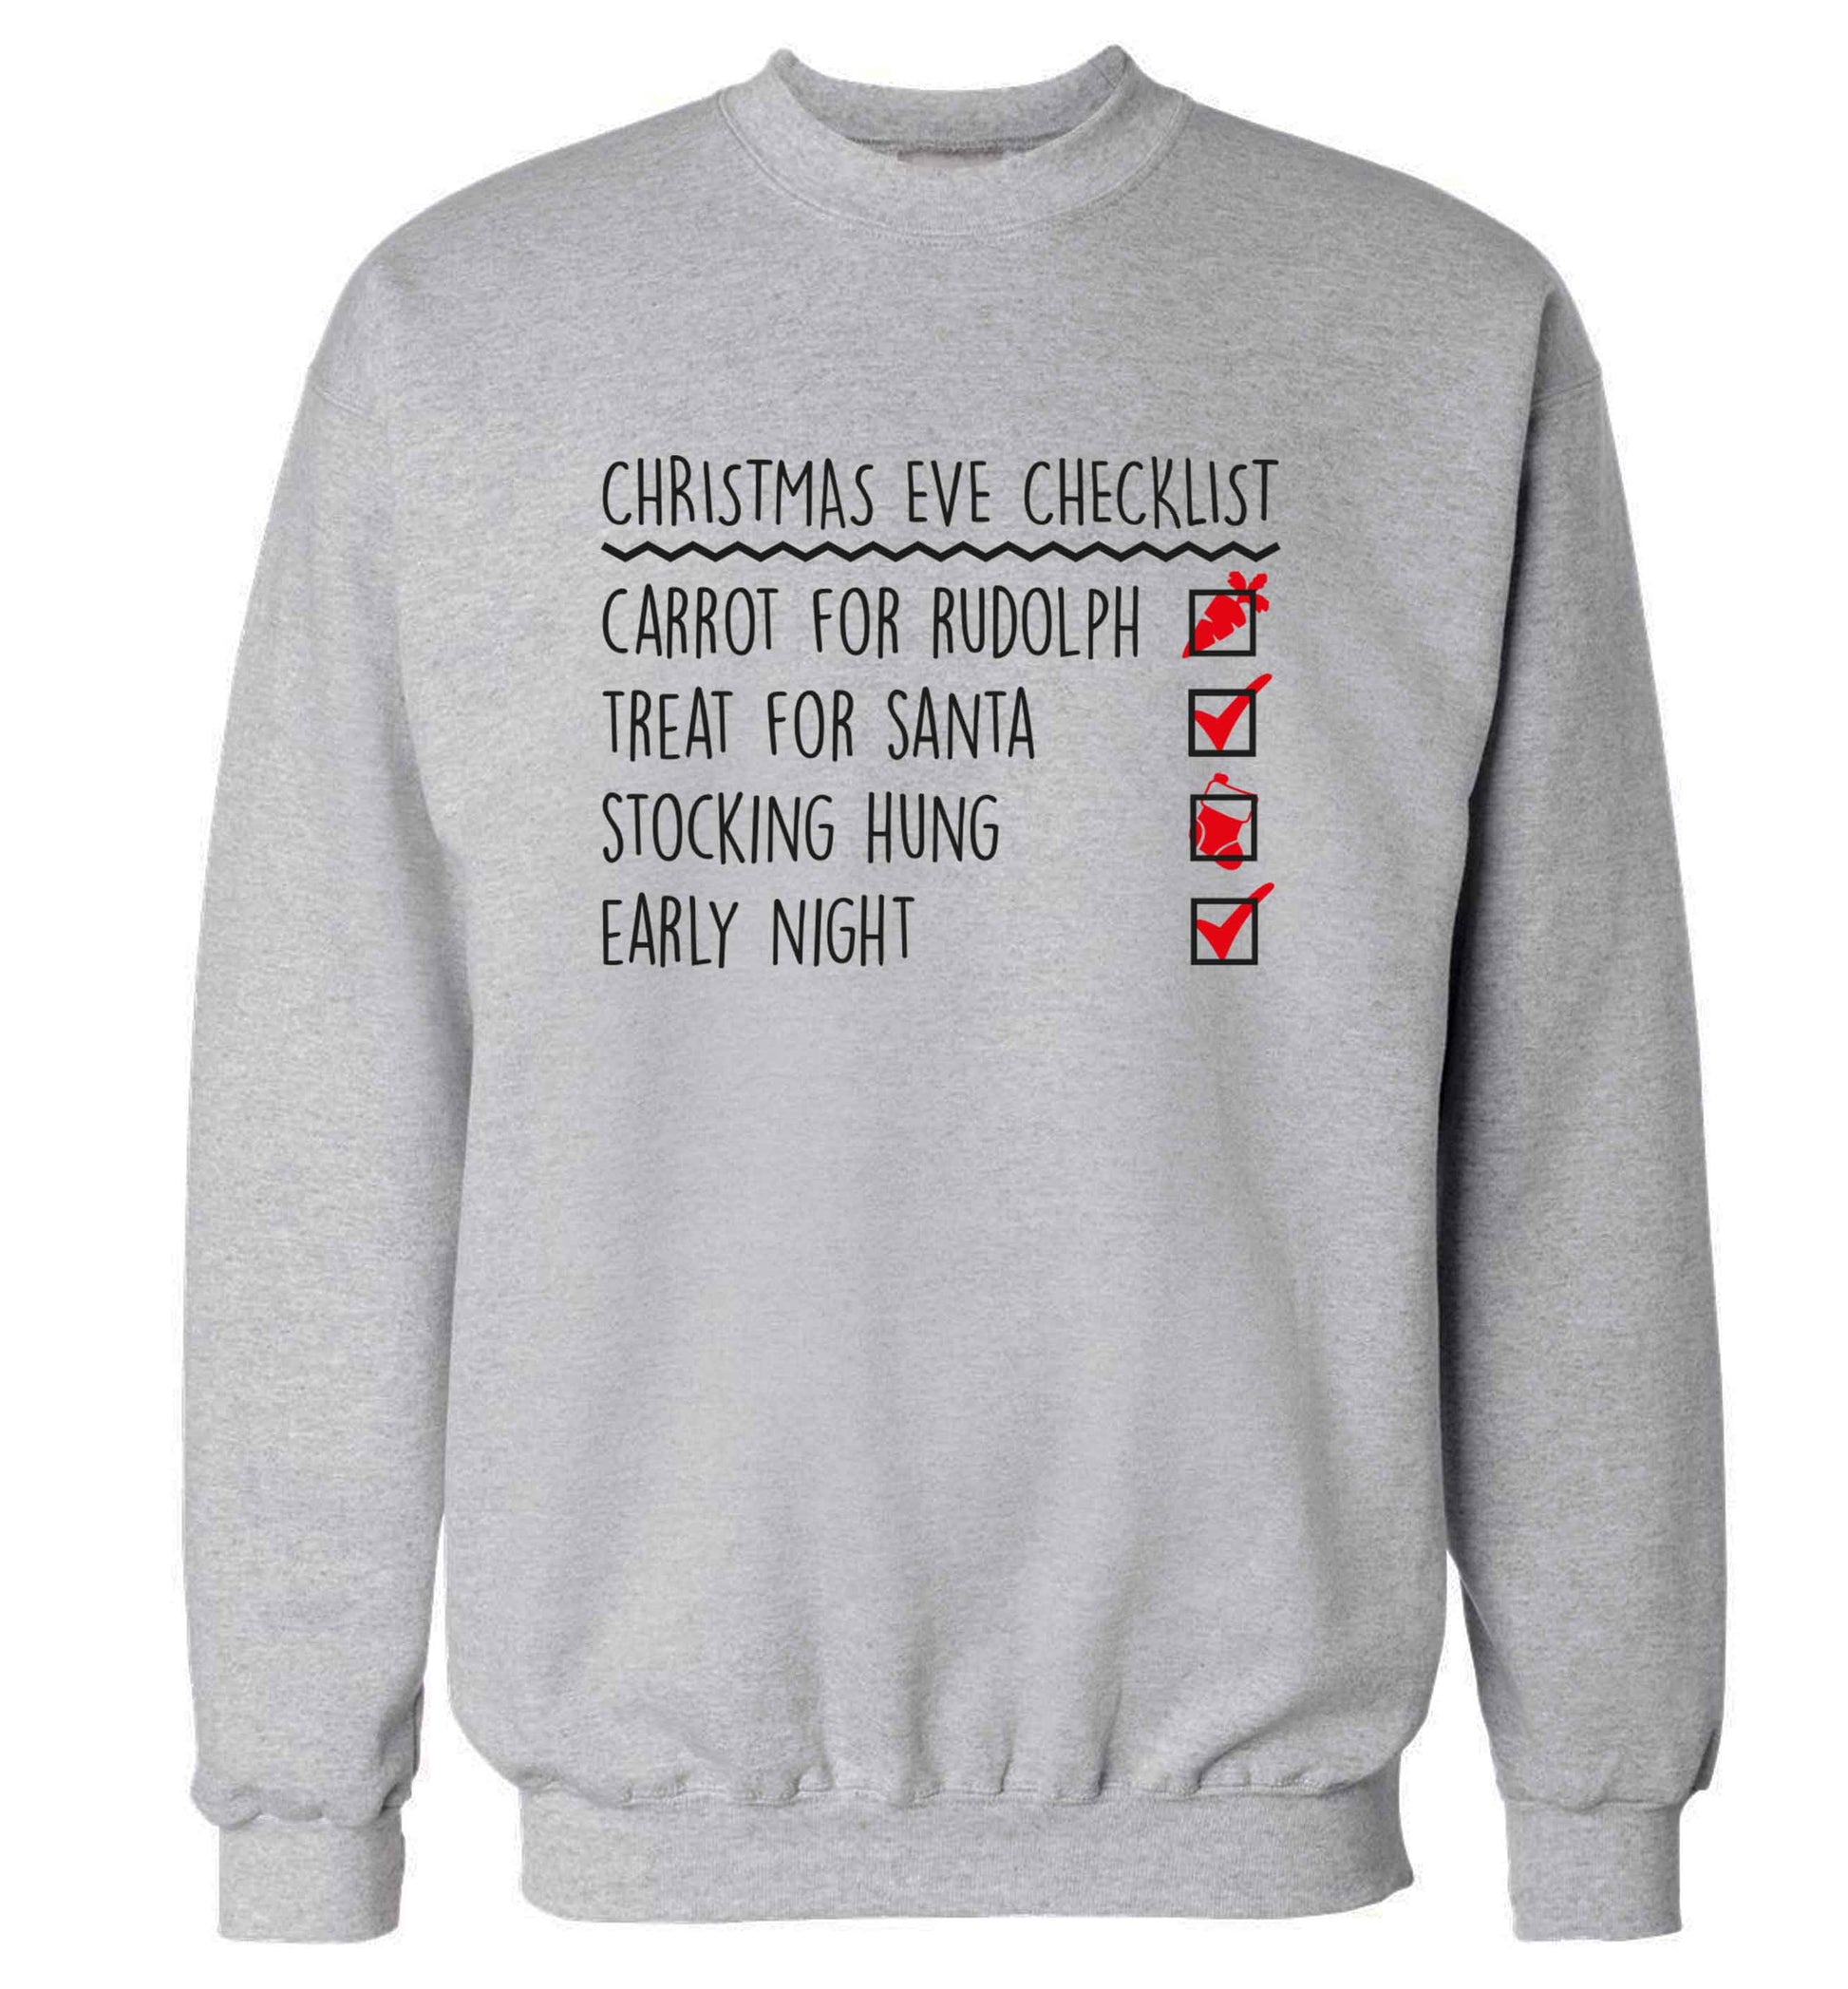 Candy Canes Candy Corns adult's unisex grey sweater 2XL